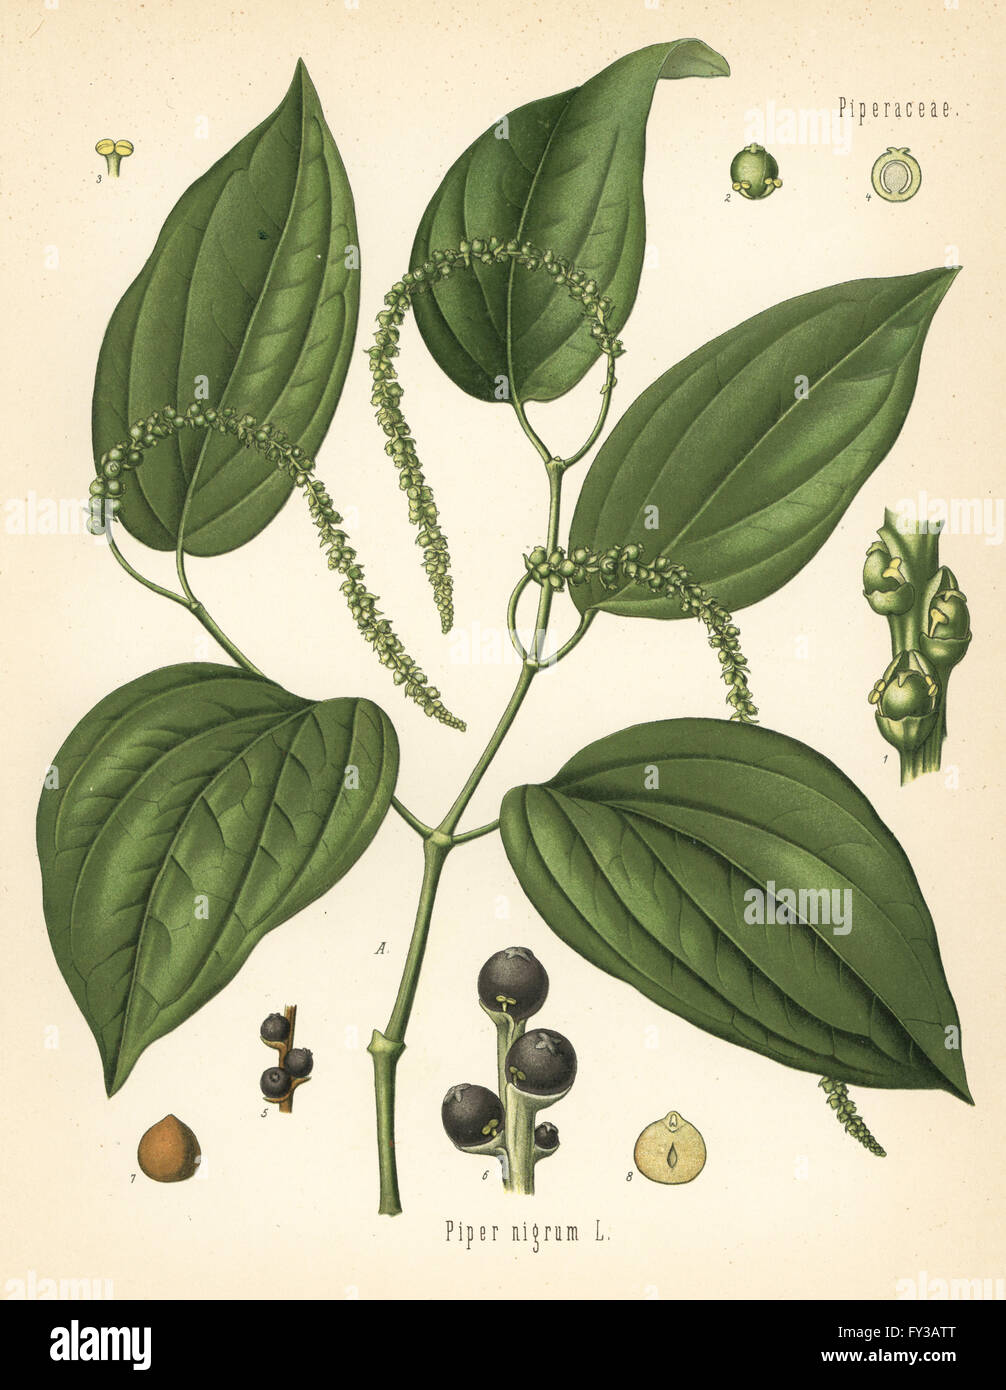 Black pepper, Piper nigrum. Chromolithograph after a botanical illustration from Hermann Adolph Koehler's Medicinal Plants, edited by Gustav Pabst, Koehler, Germany, 1887. Stock Photo